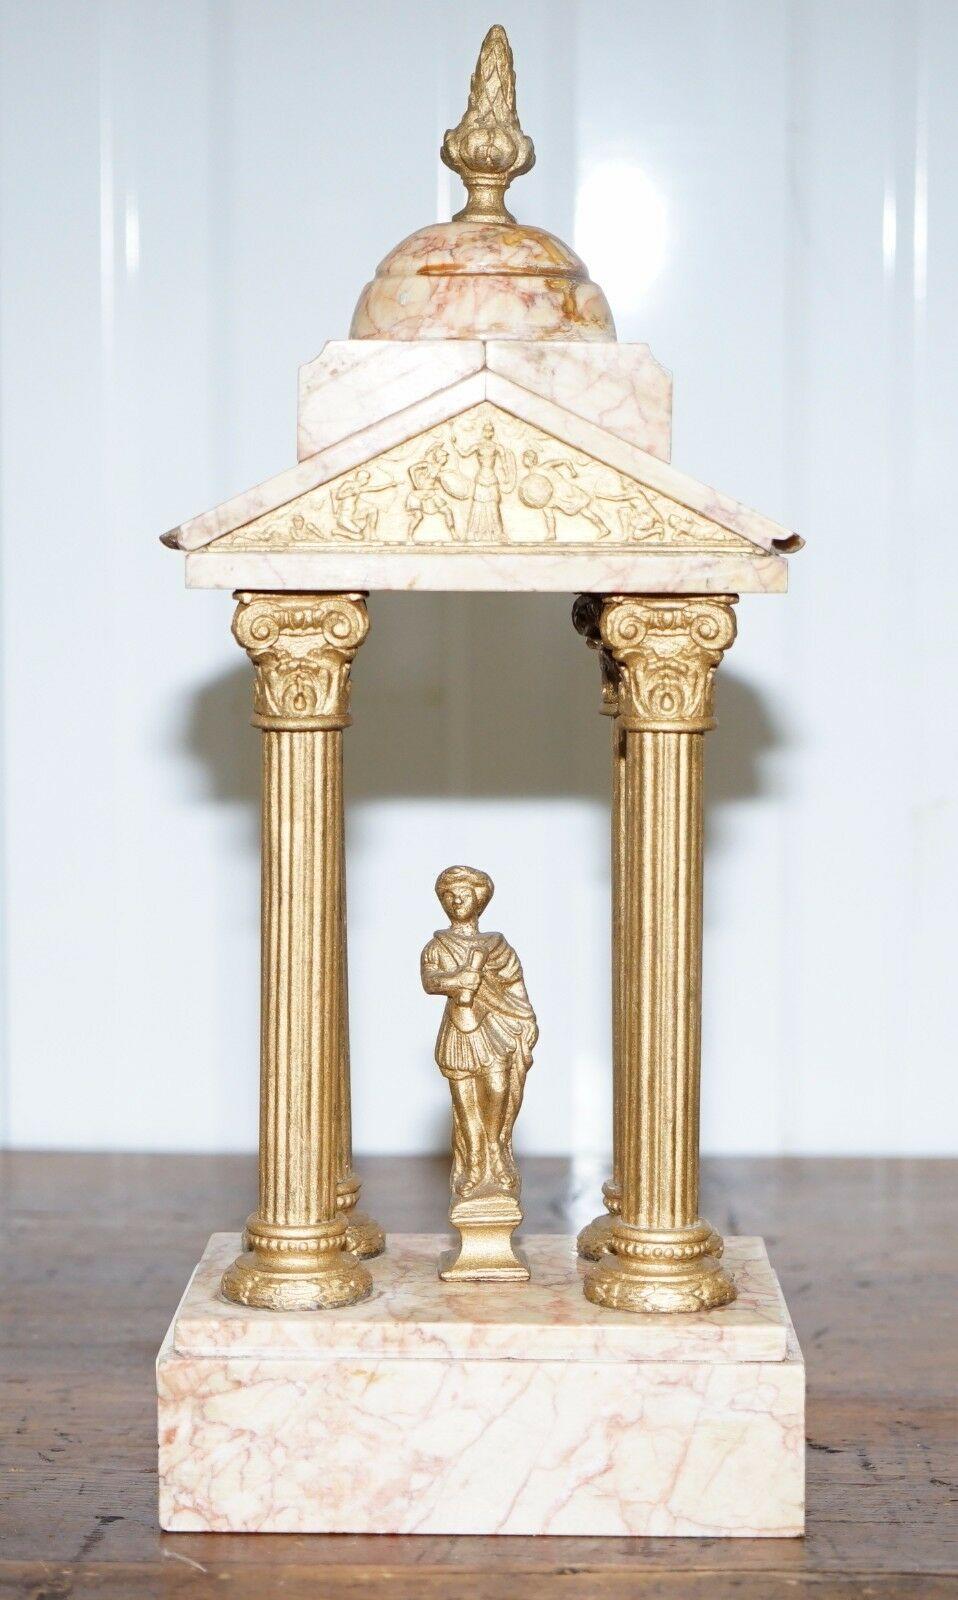 We are delighted to offer for sale this pair of large heavily distressed very old solid marble with bronzed Corinthian pillars and Roman neoclassical figures Grand Tour statues

A very old and good looking solid marble pair, the pictures really